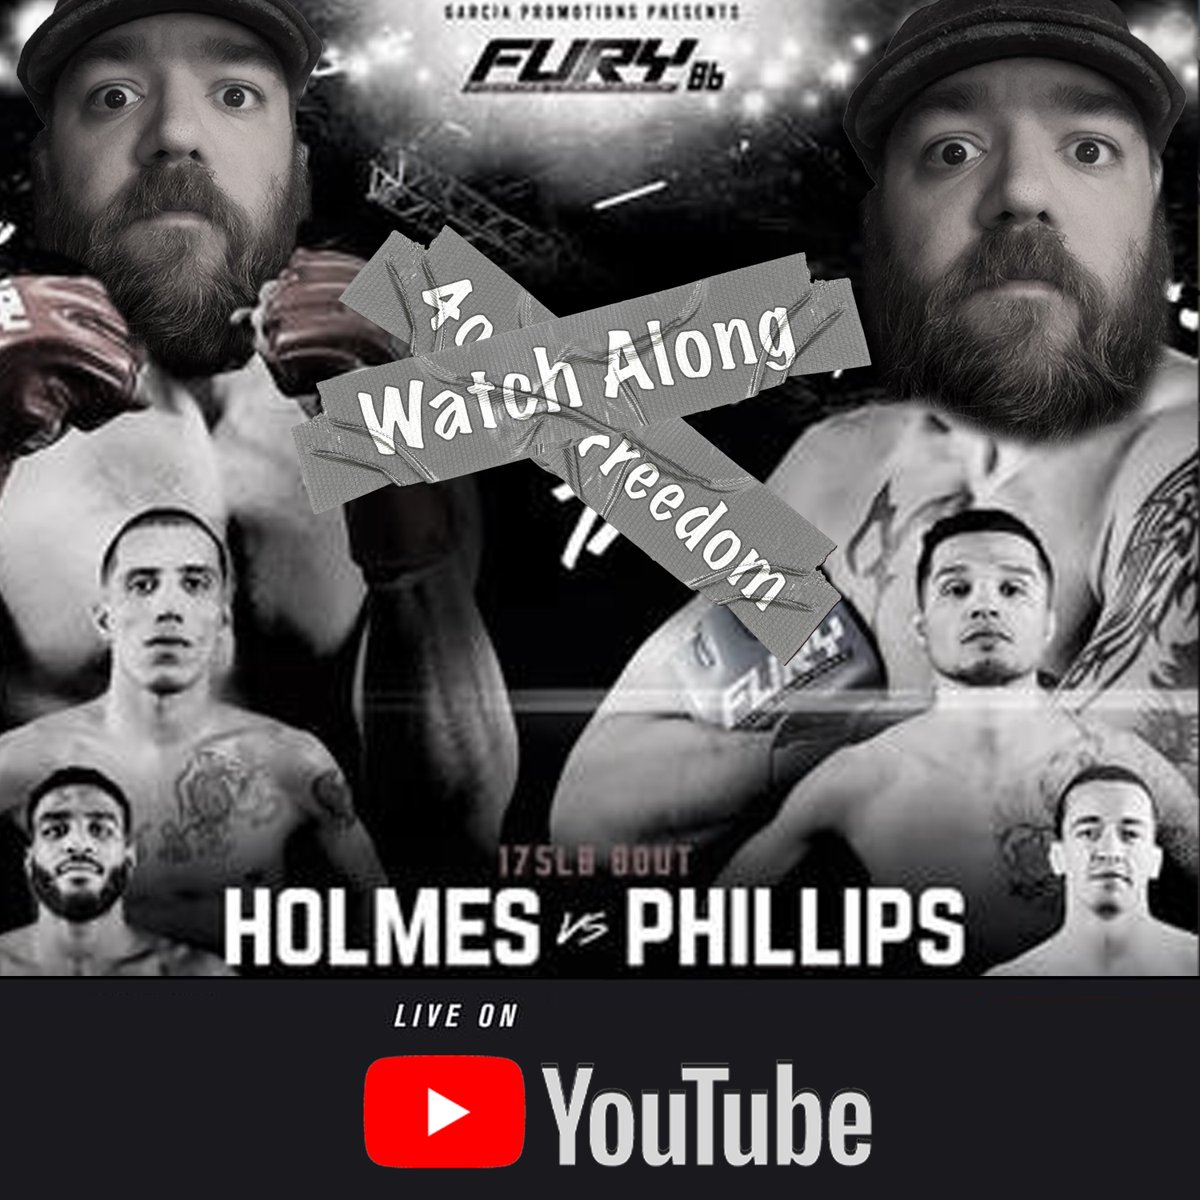 Not as fun design tonight, but hey it’s a #FuryFC86 watch along tonight for a kickass card.

Kicking off with the Main Card at 9pm Eastern.

Unleash the Fury and stuff: youtube.com/live/7bOhQWEe6…